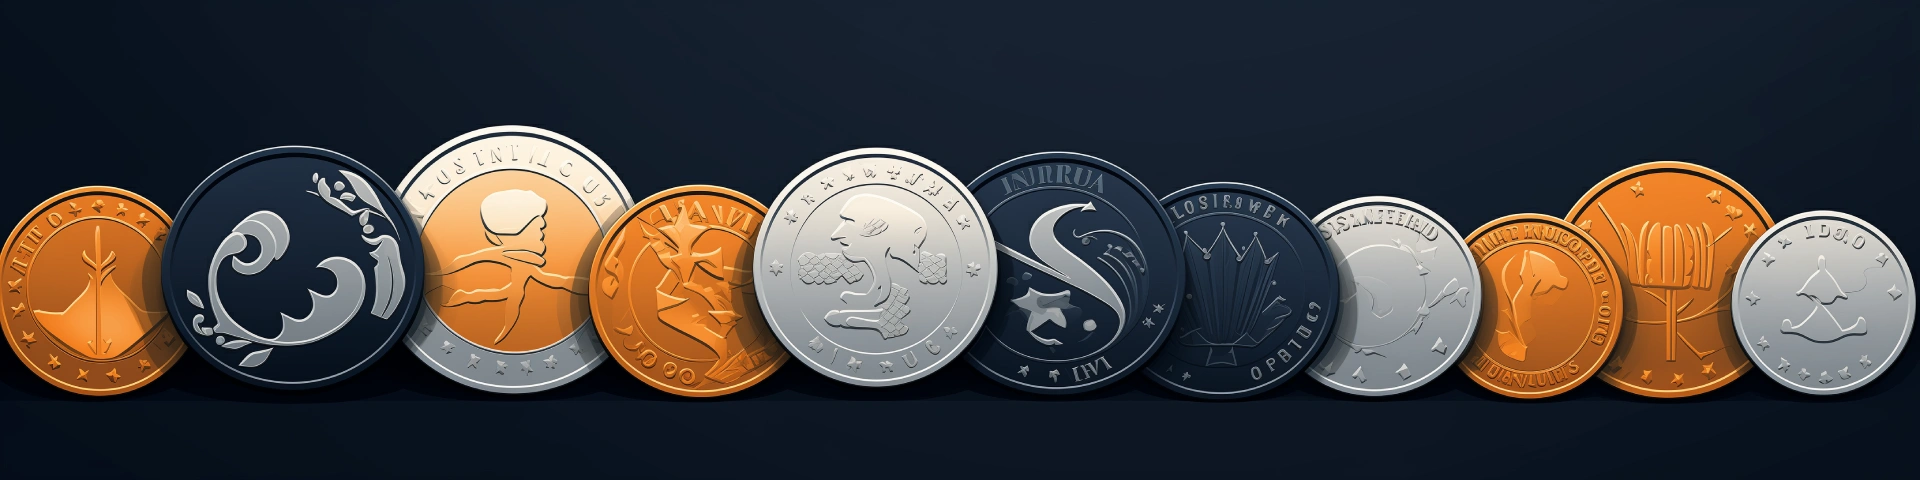 Coins and tokens in different shapes and looks